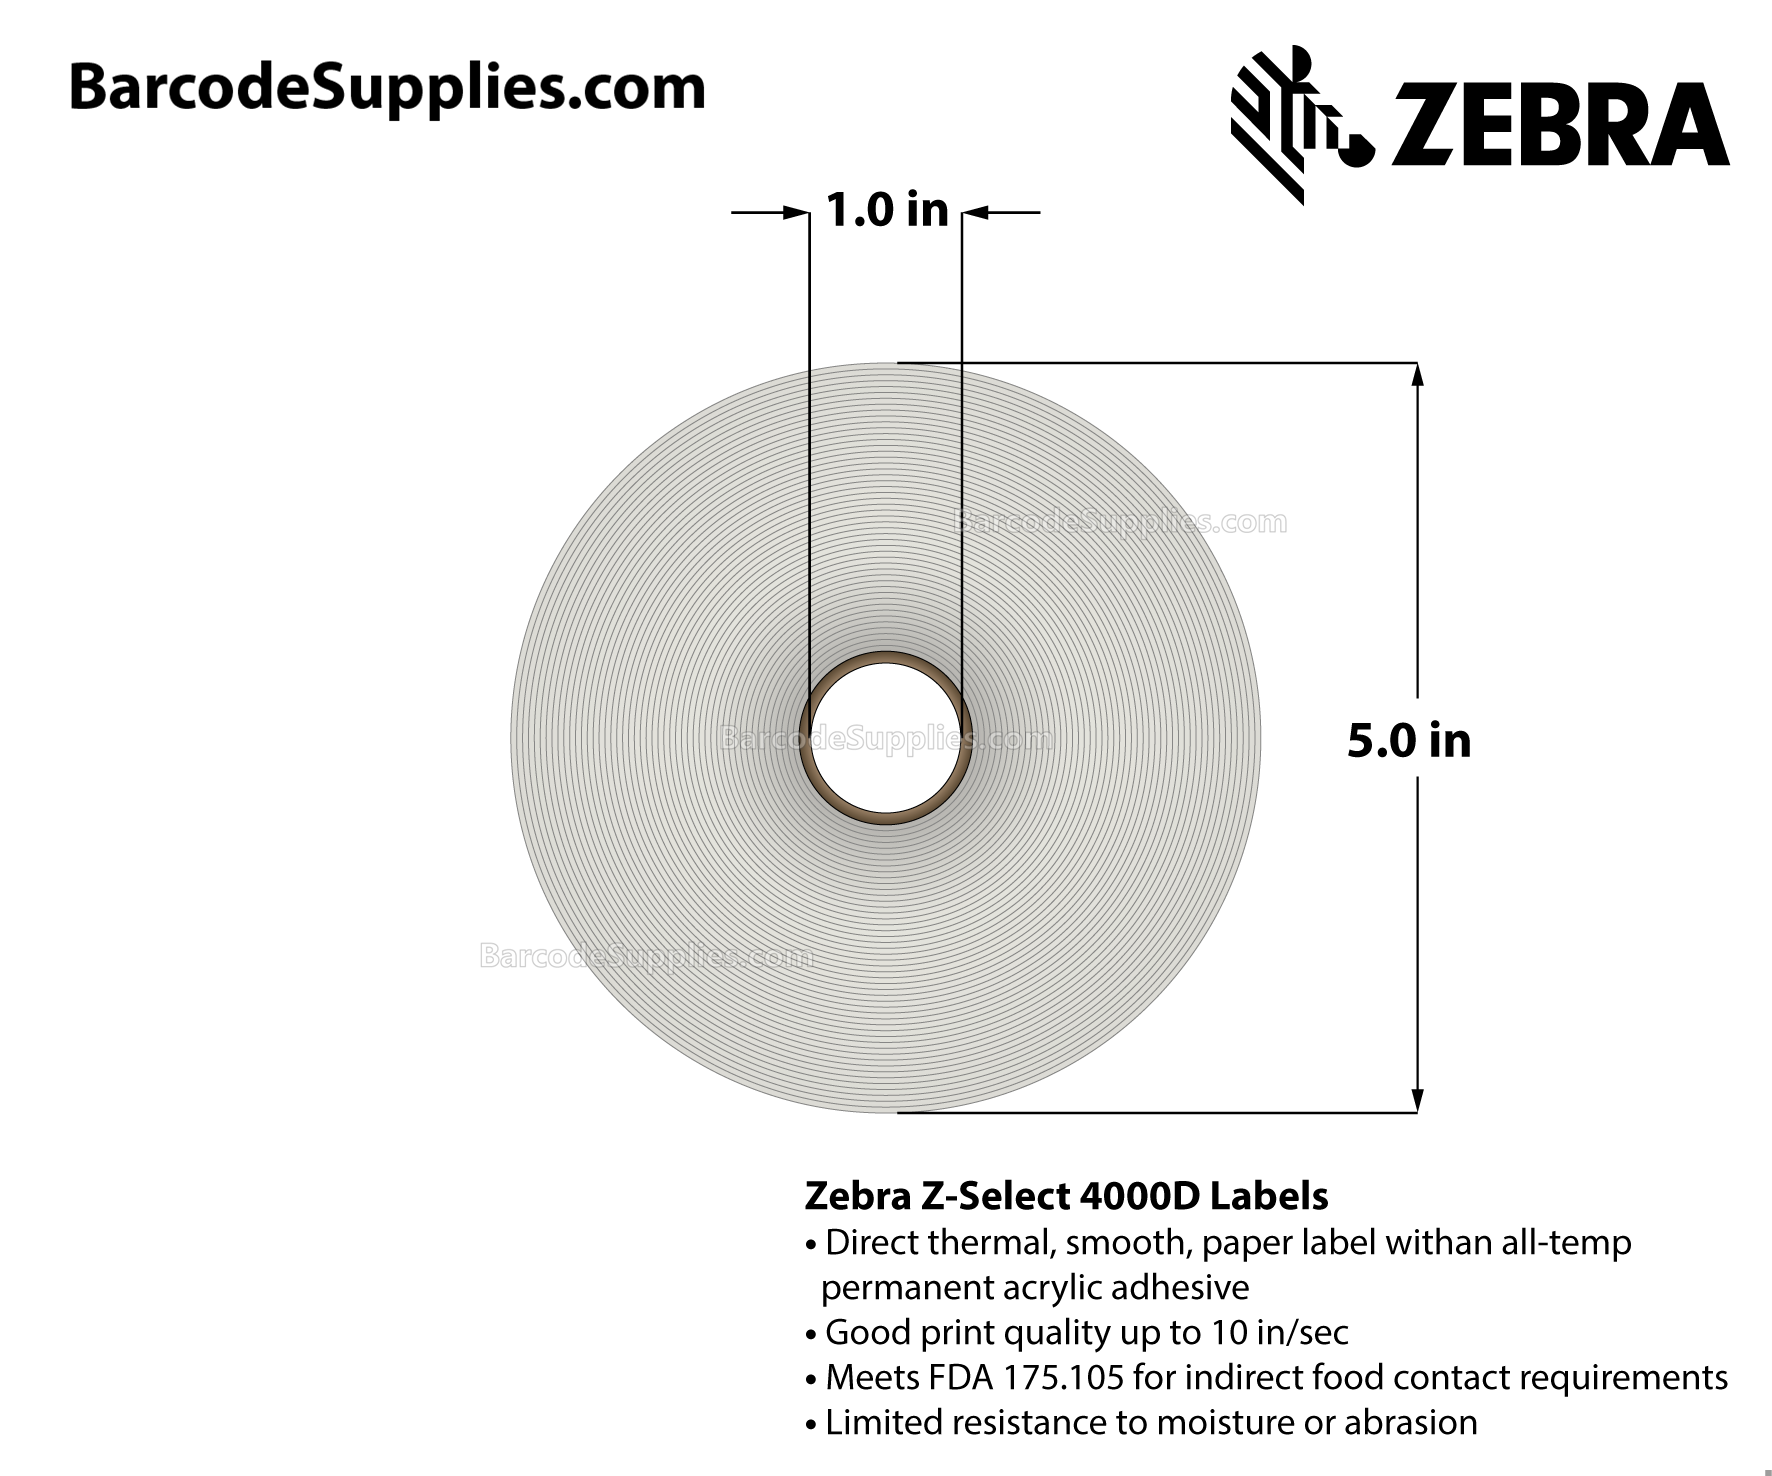 4 x 6 Direct Thermal White Z-Select 4000D Labels With All-Temp Adhesive - Not Perforated - 475 Labels Per Roll - Carton Of 6 Rolls - 2850 Labels Total - MPN: 10010049